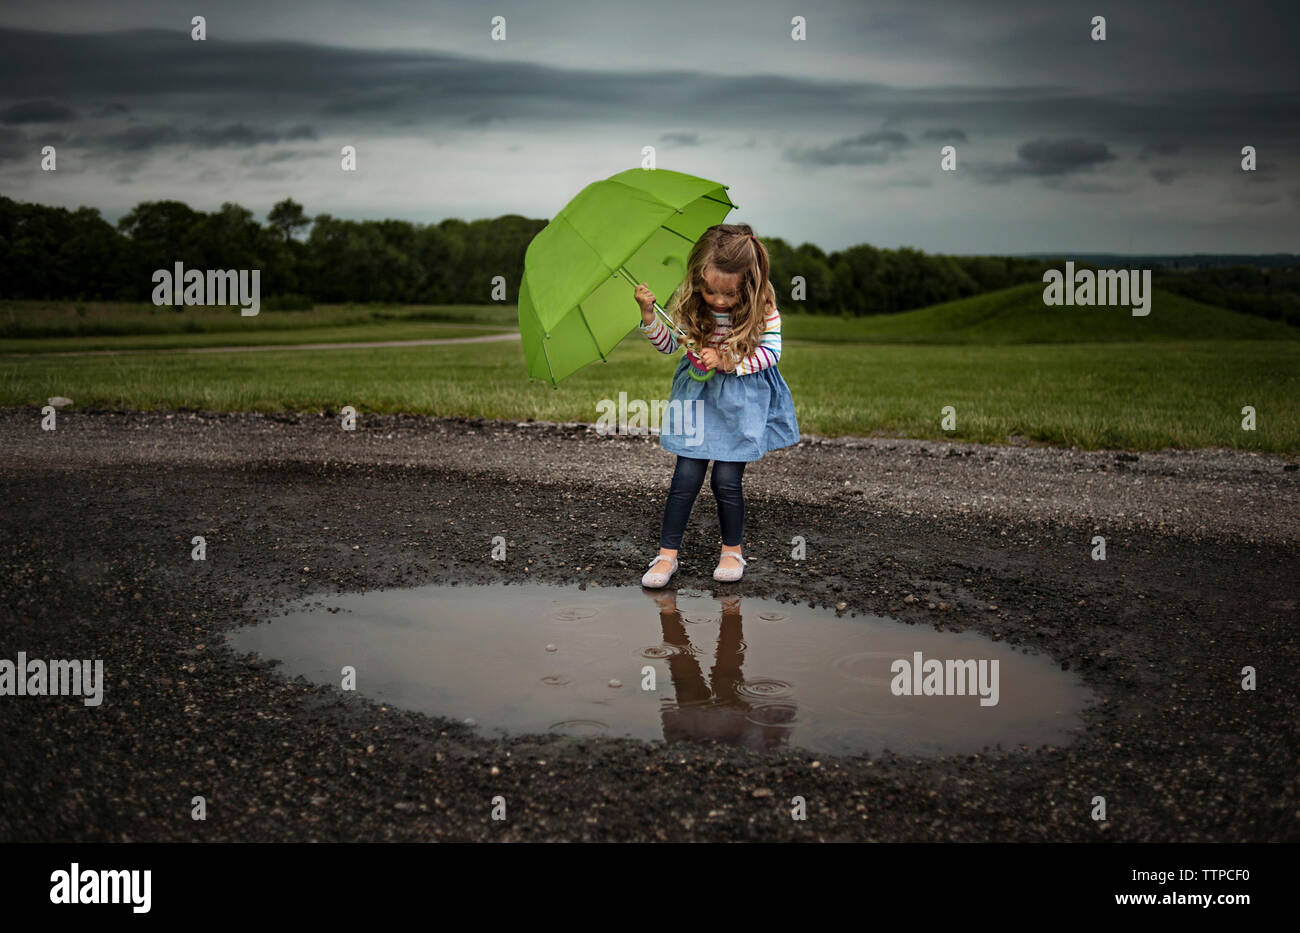 Girl holding umbrella while walking into puddle on road against stormy clouds Stock Photo